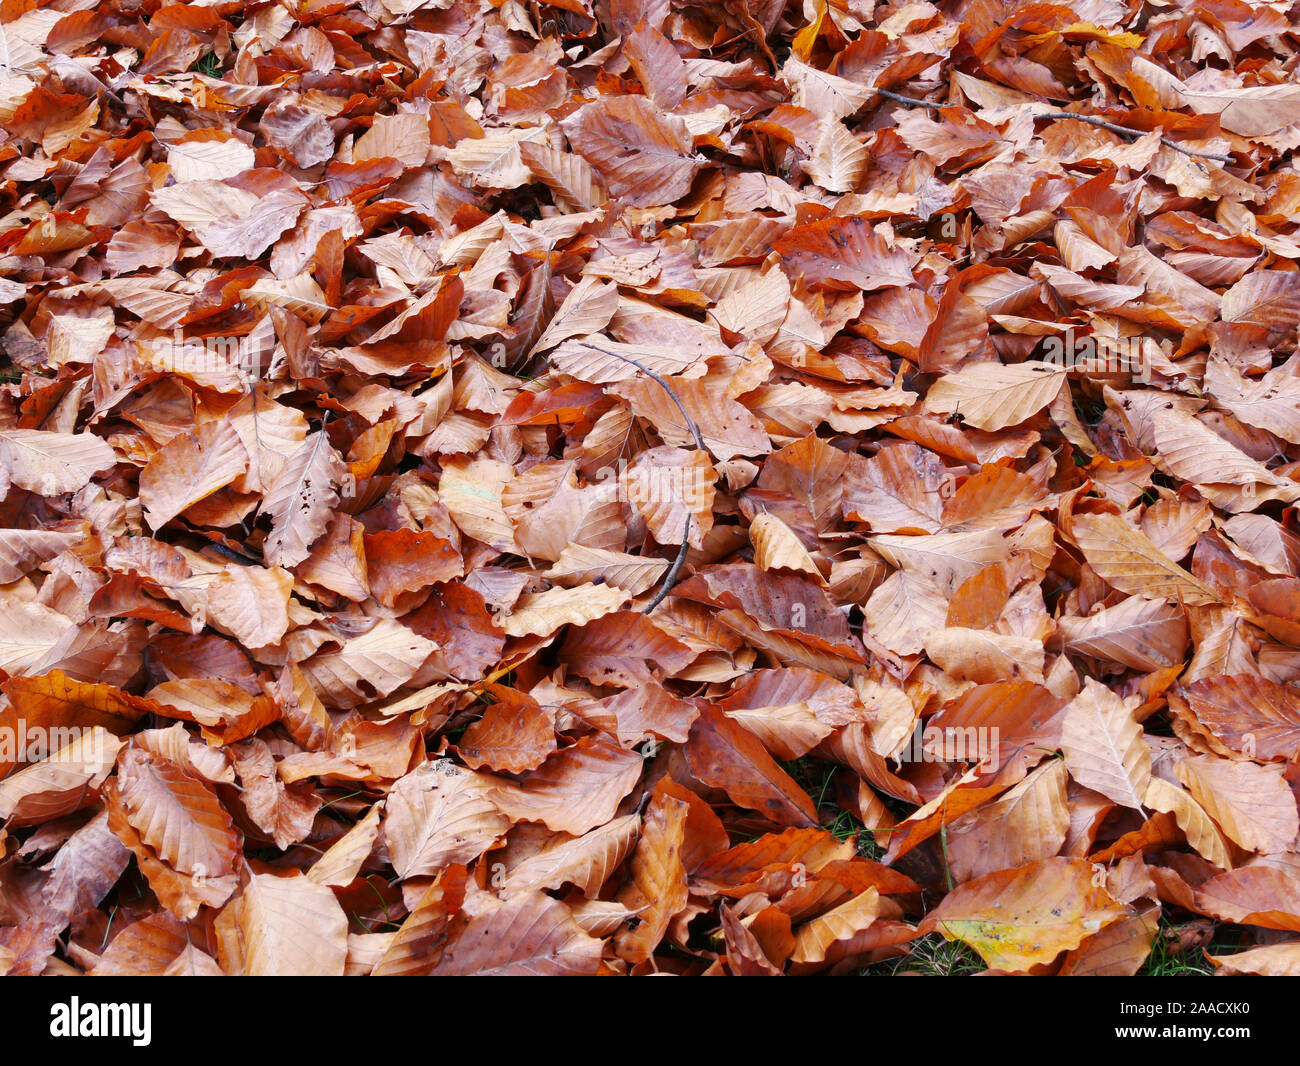 Autumn, November. Fallen leaves from centuries-old trees have covered the ground. Stock Photo